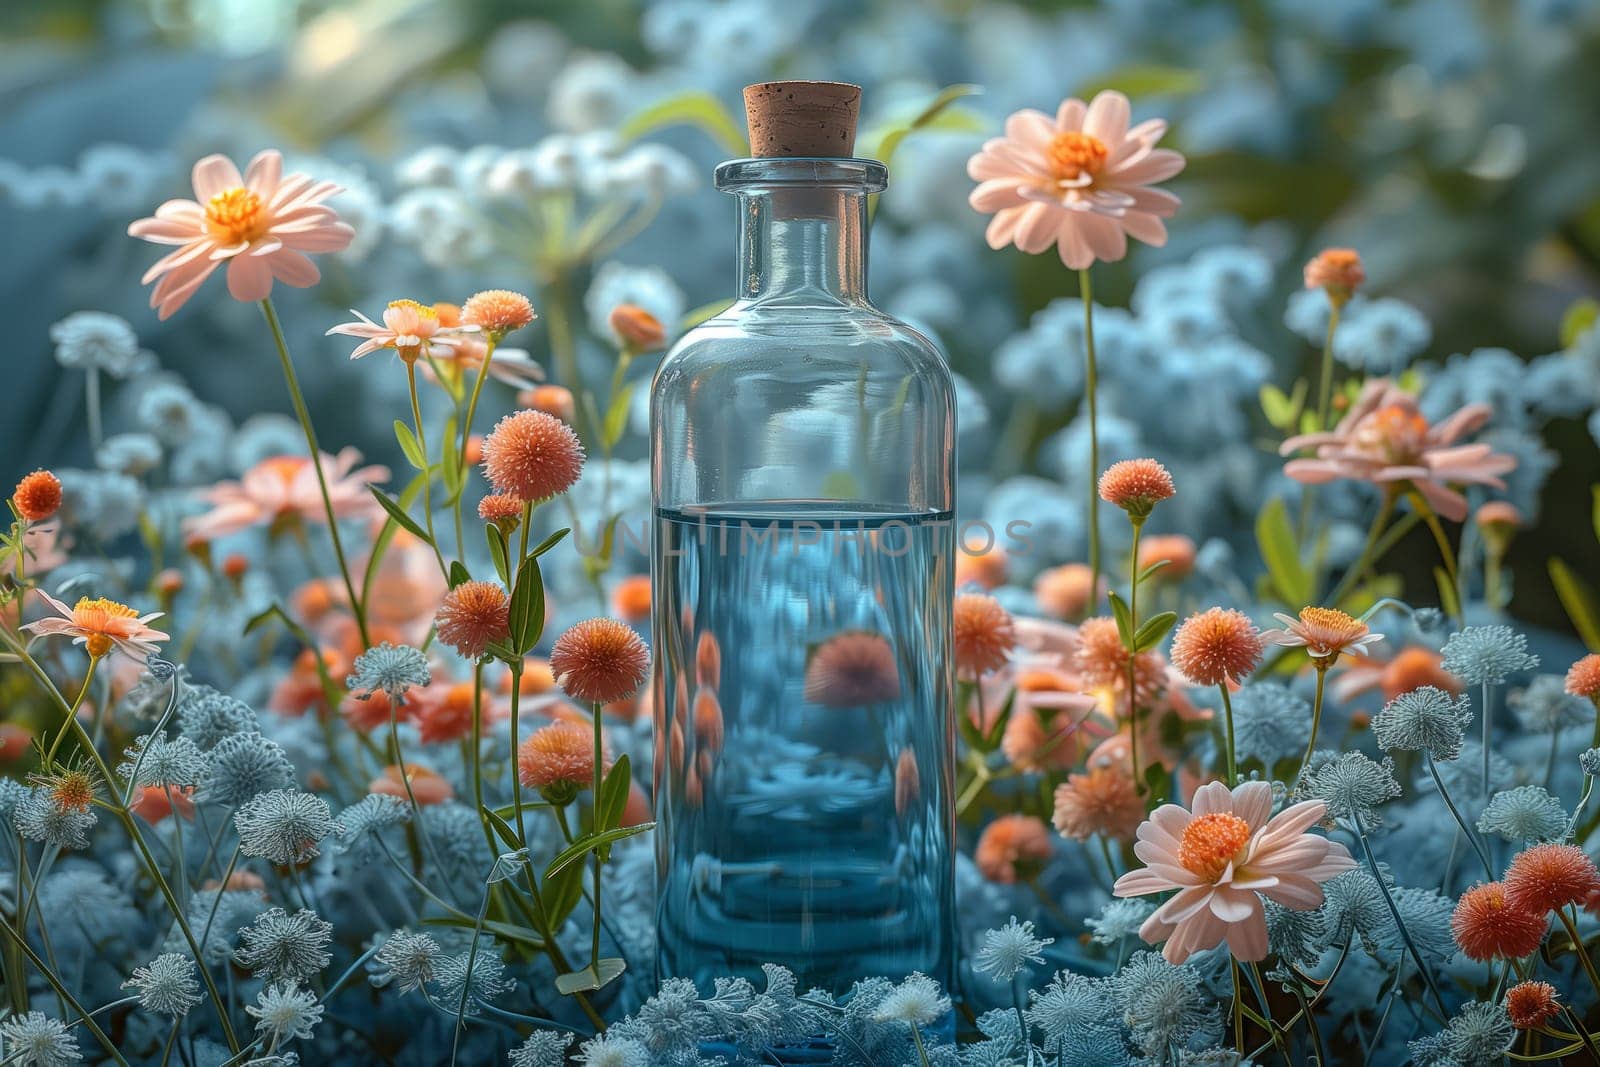 A glass bottle sits among vibrant flowers in a picturesque field, creating a stunning landscape of plants and petals